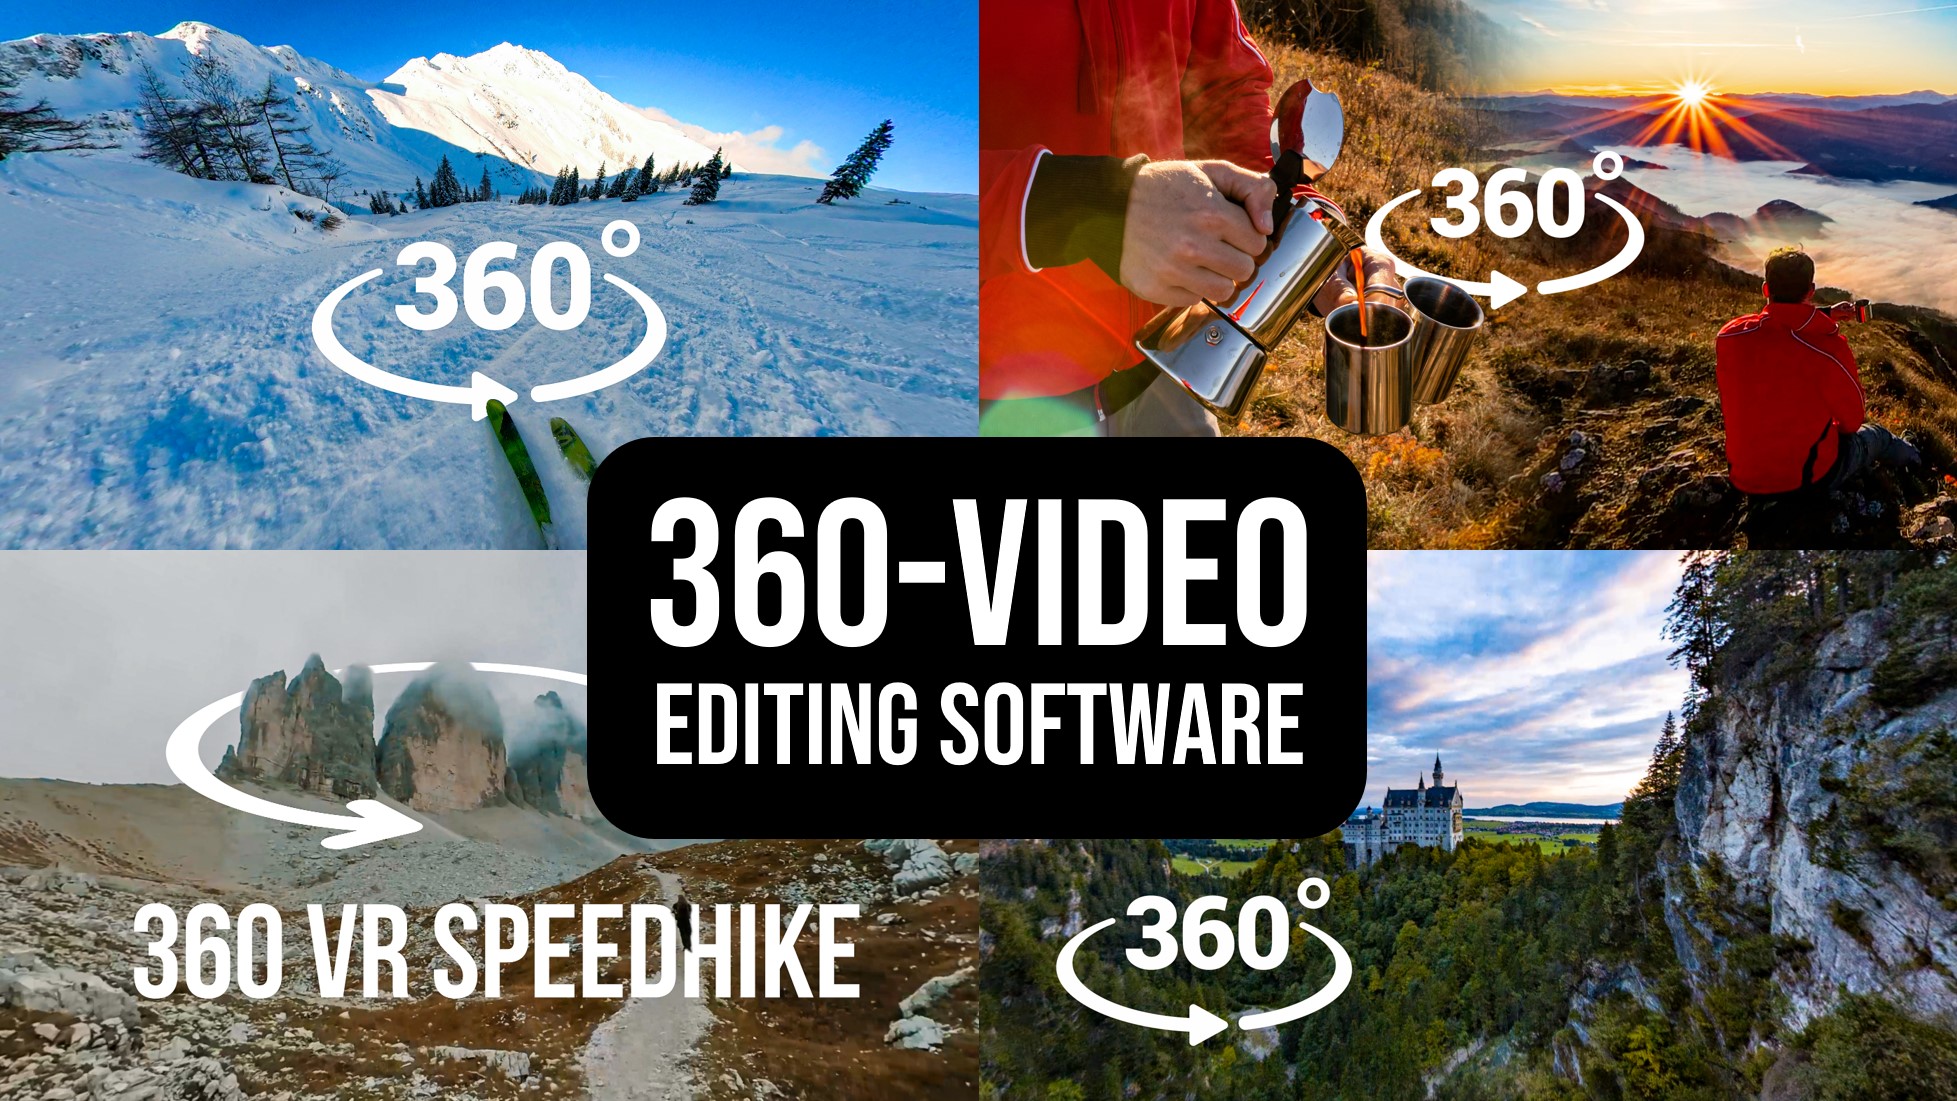 4K 360 VR Video Download Free [Ultimate Guide]